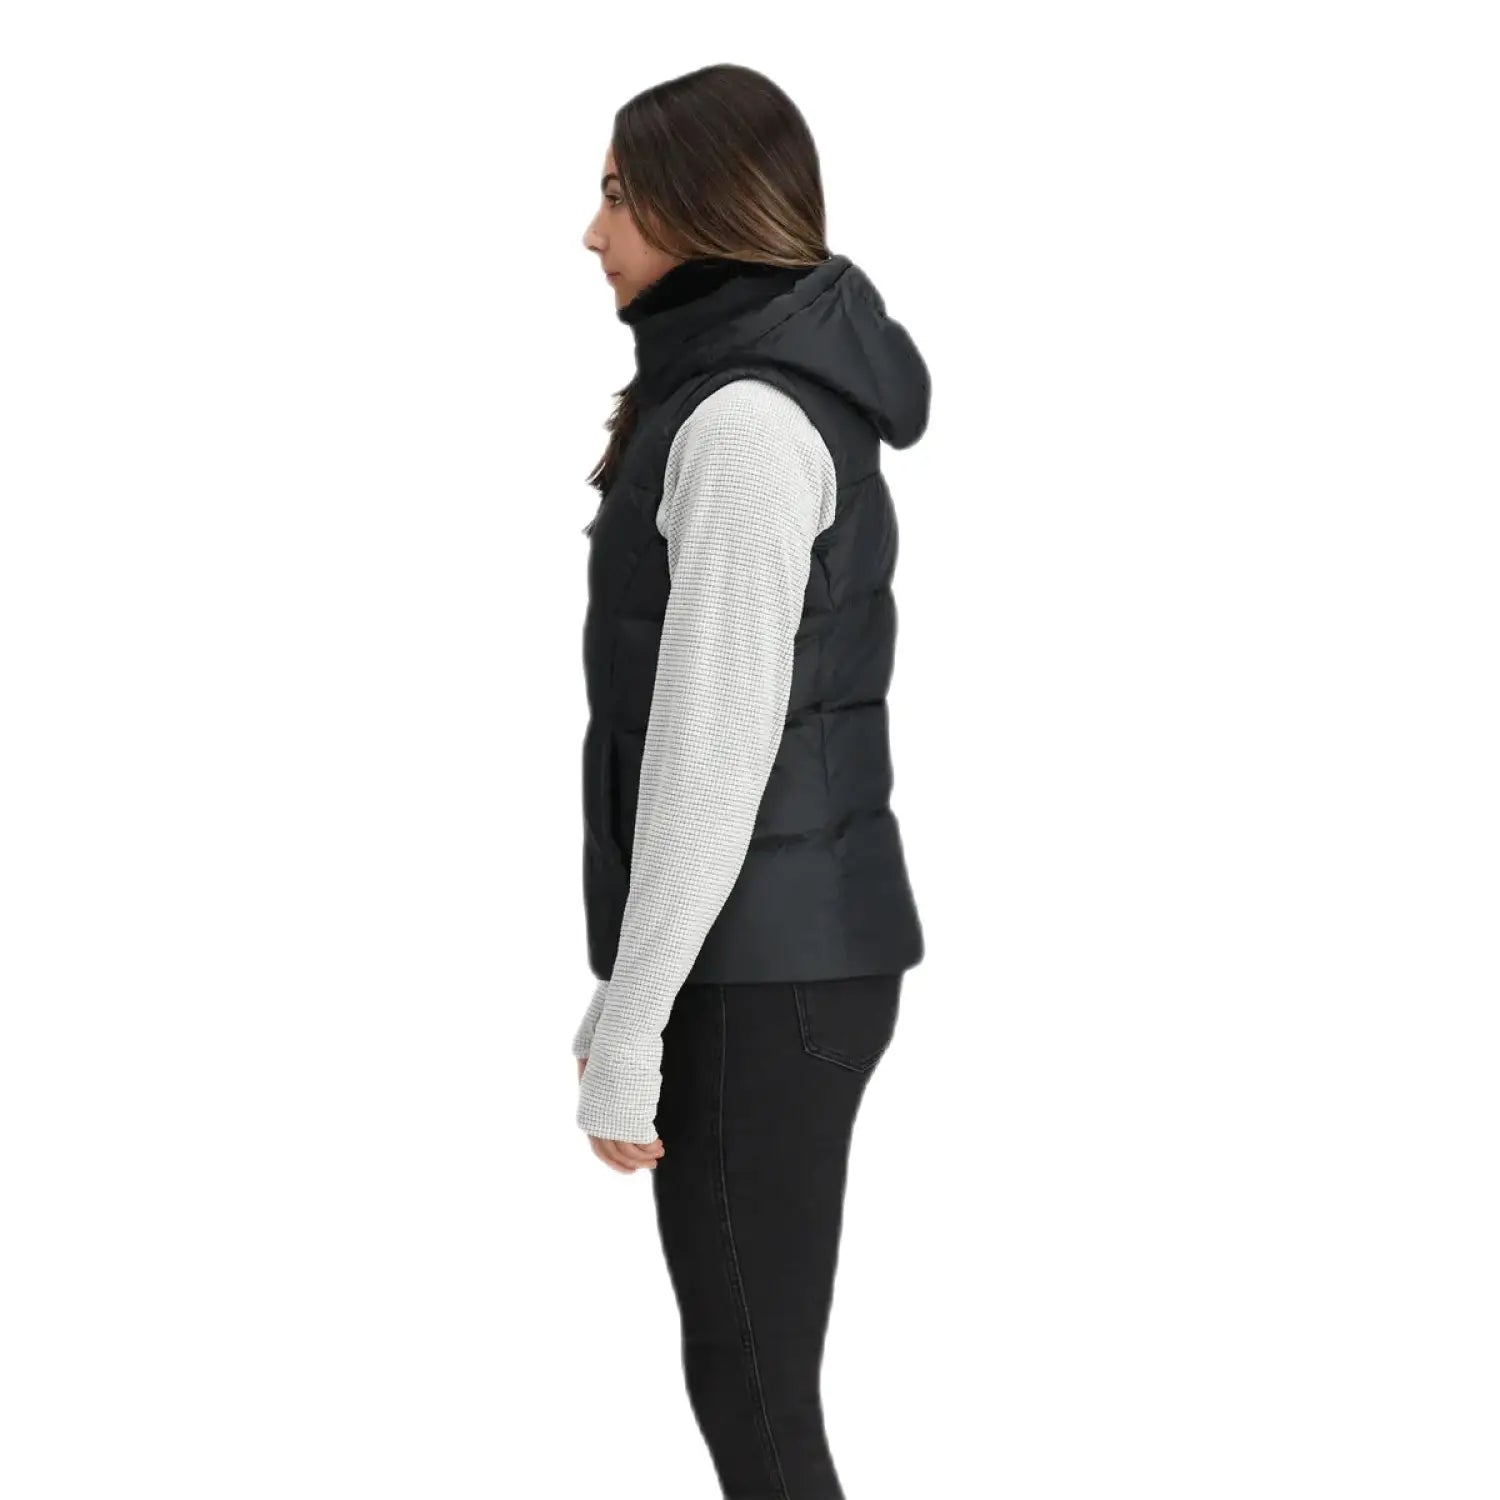 Outdoor Research Women's Coldfront Hooded Down Vest II shown in the Black color option. Side view on a model.